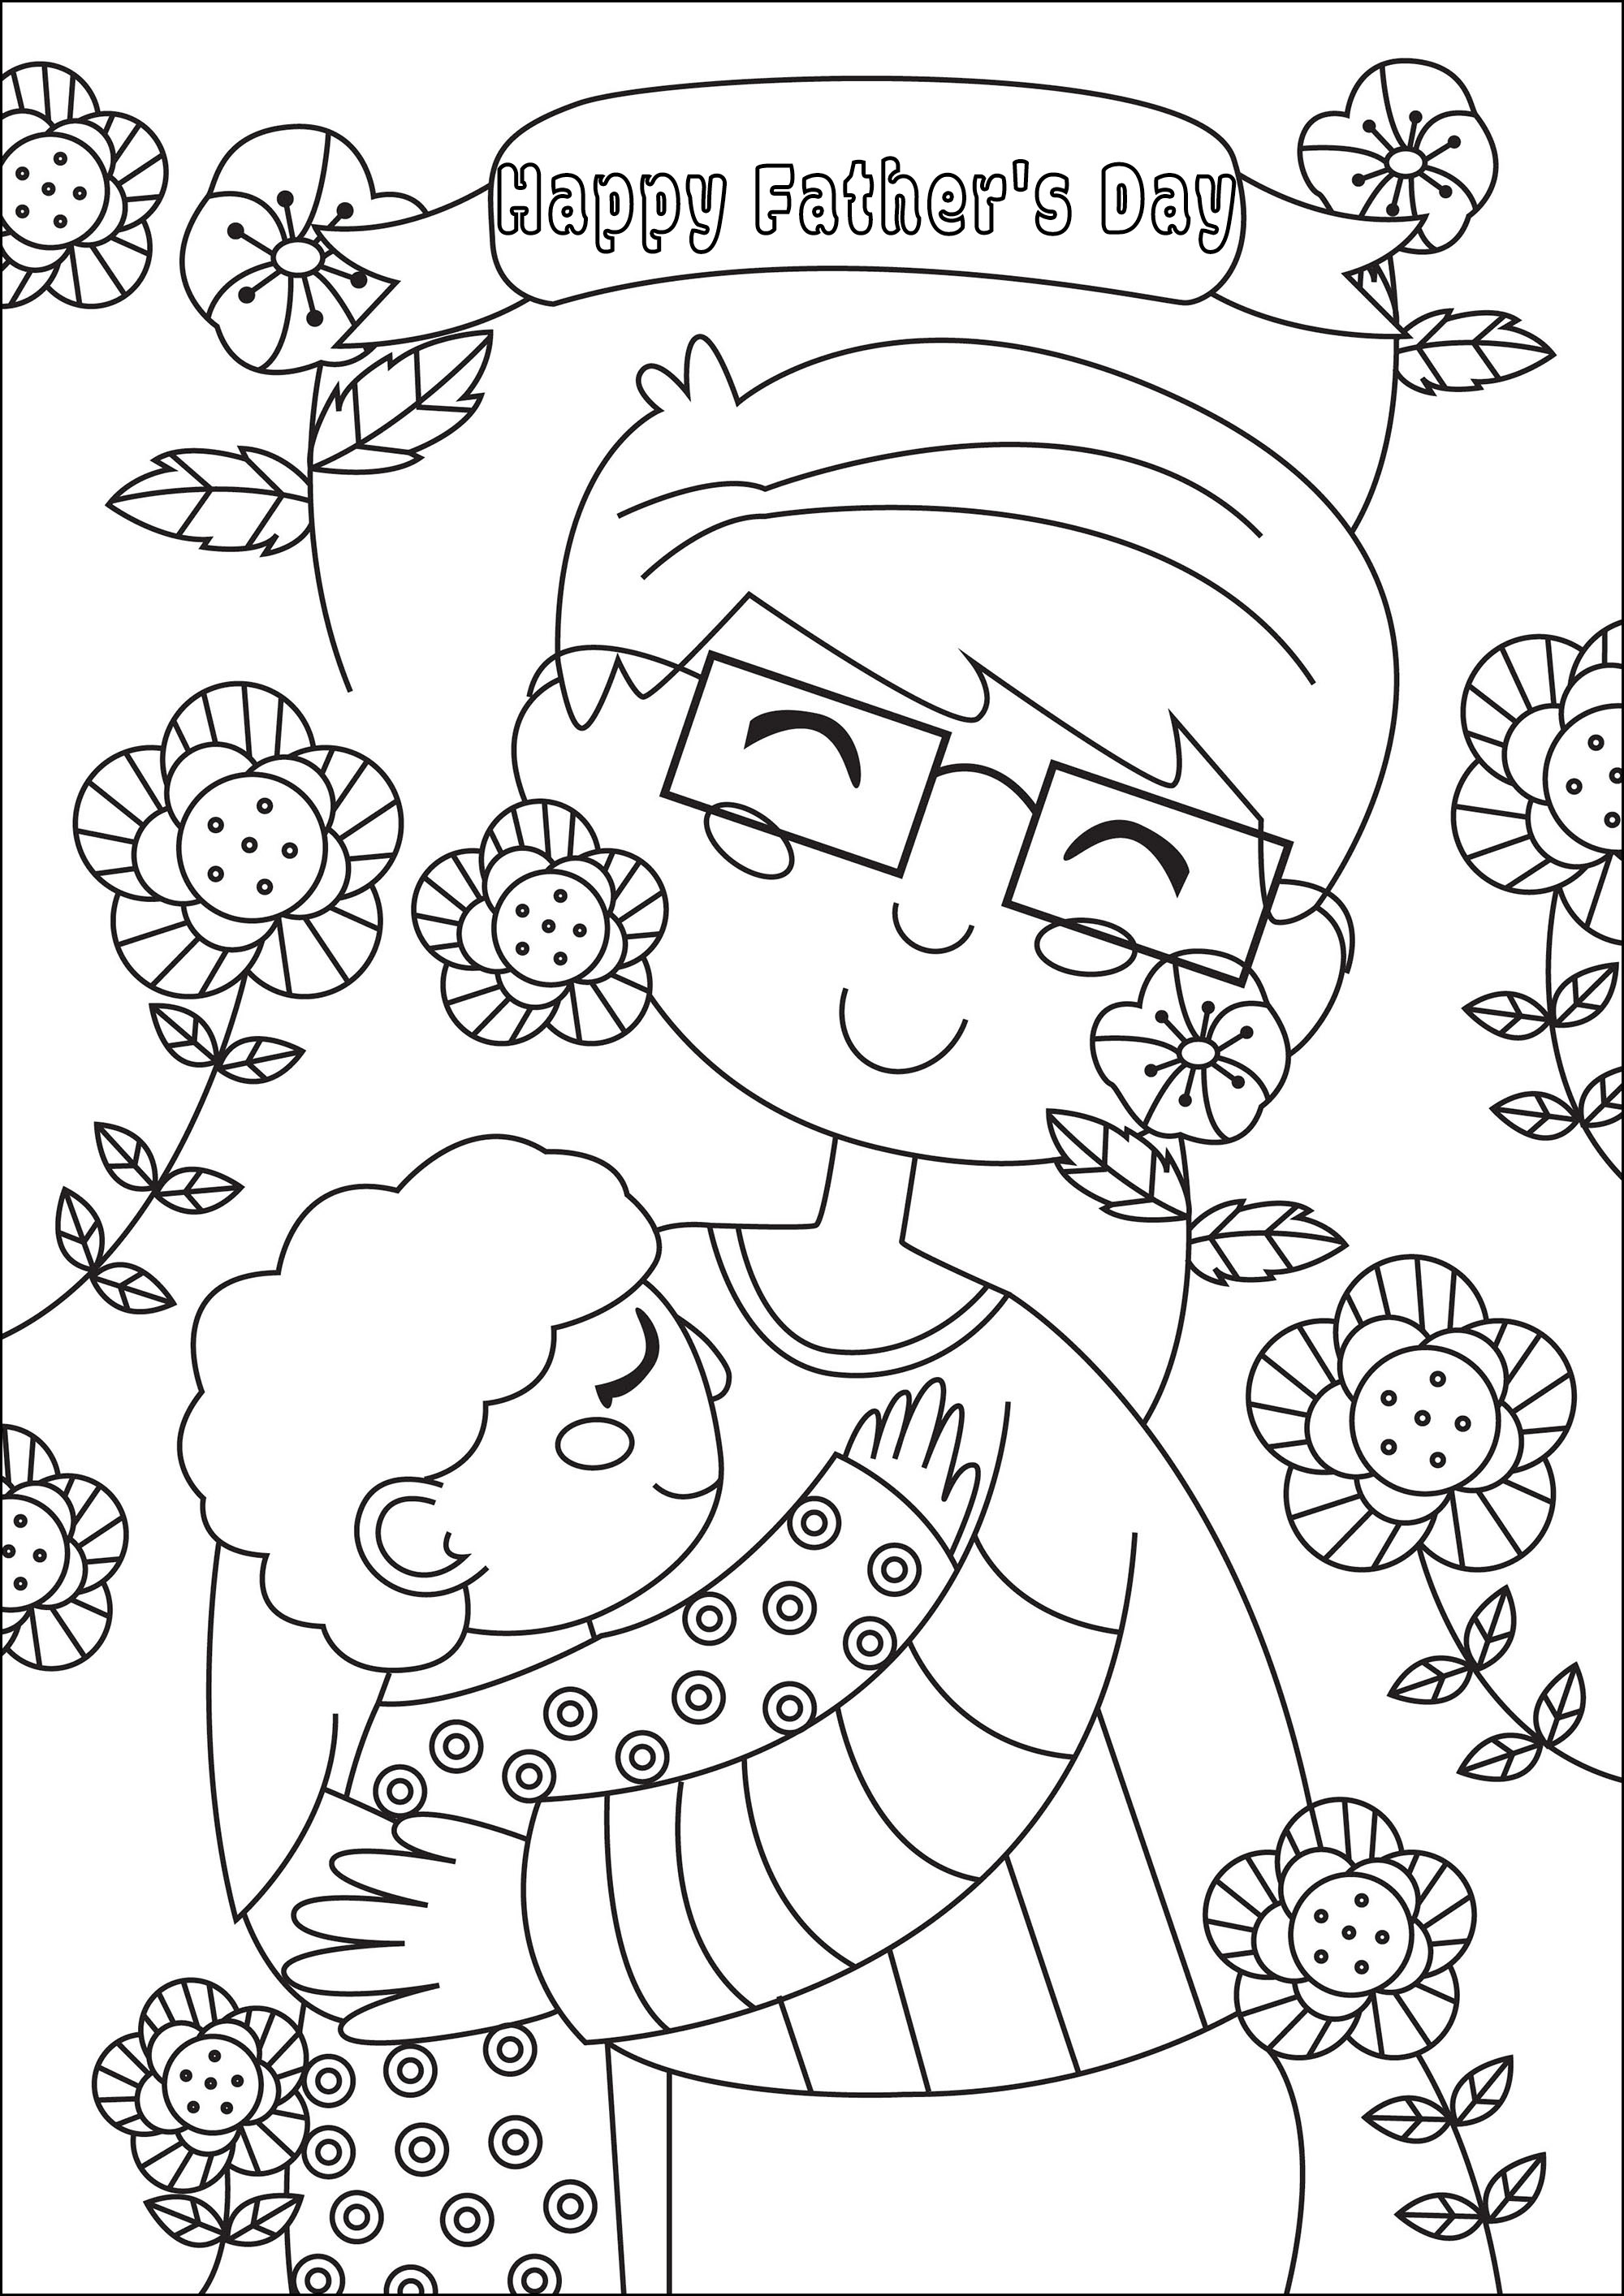 Coloring for Father's Day. A beautiful coloring page with a child embracing his beloved daddy, Artist : Gaelle Picard